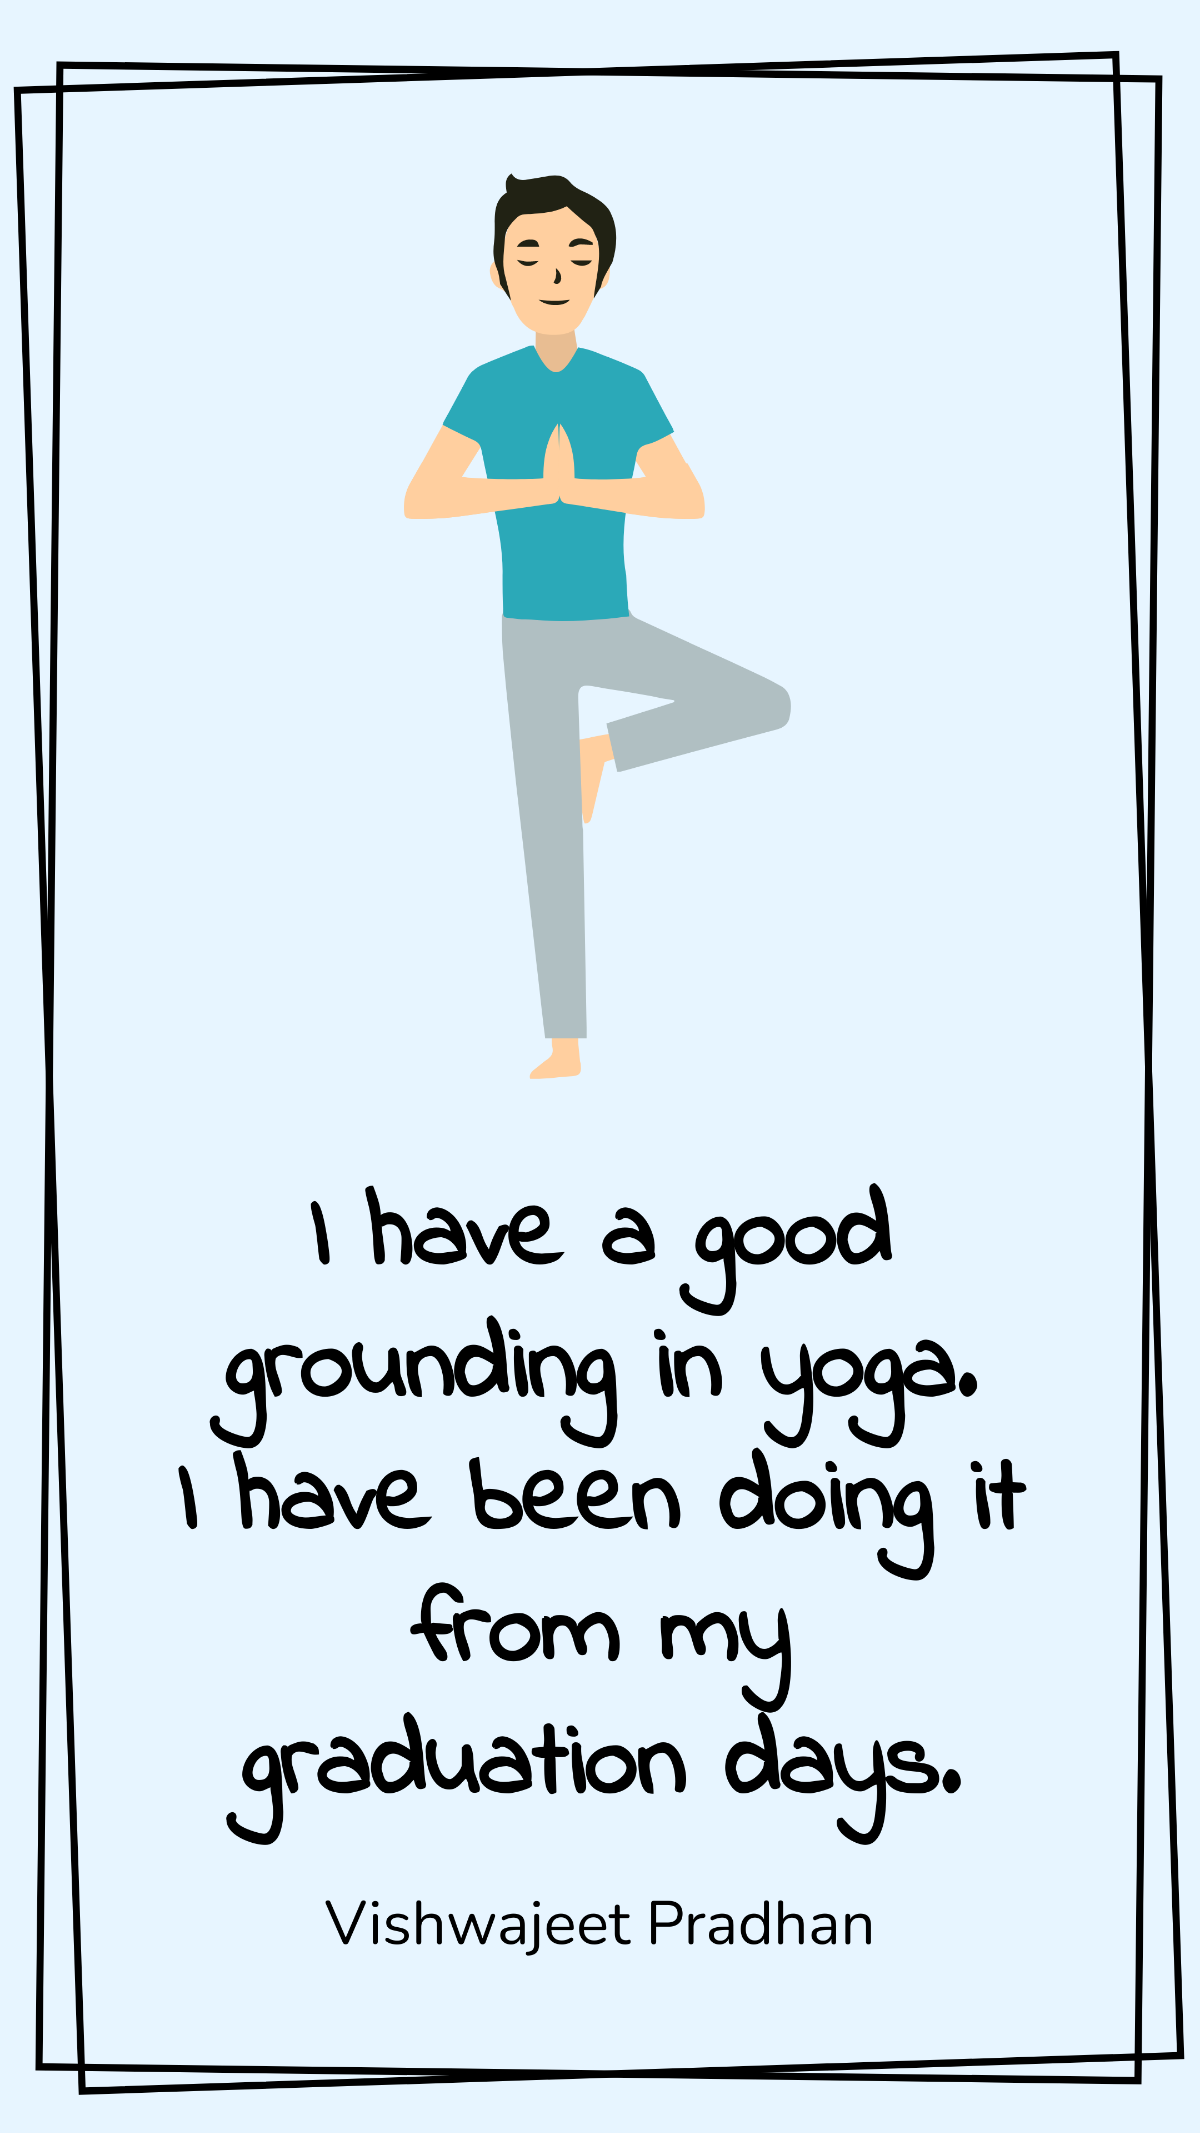 Free Vishwajeet Pradhan - I have a good grounding in yoga. I have been doing it from my graduation days. Template